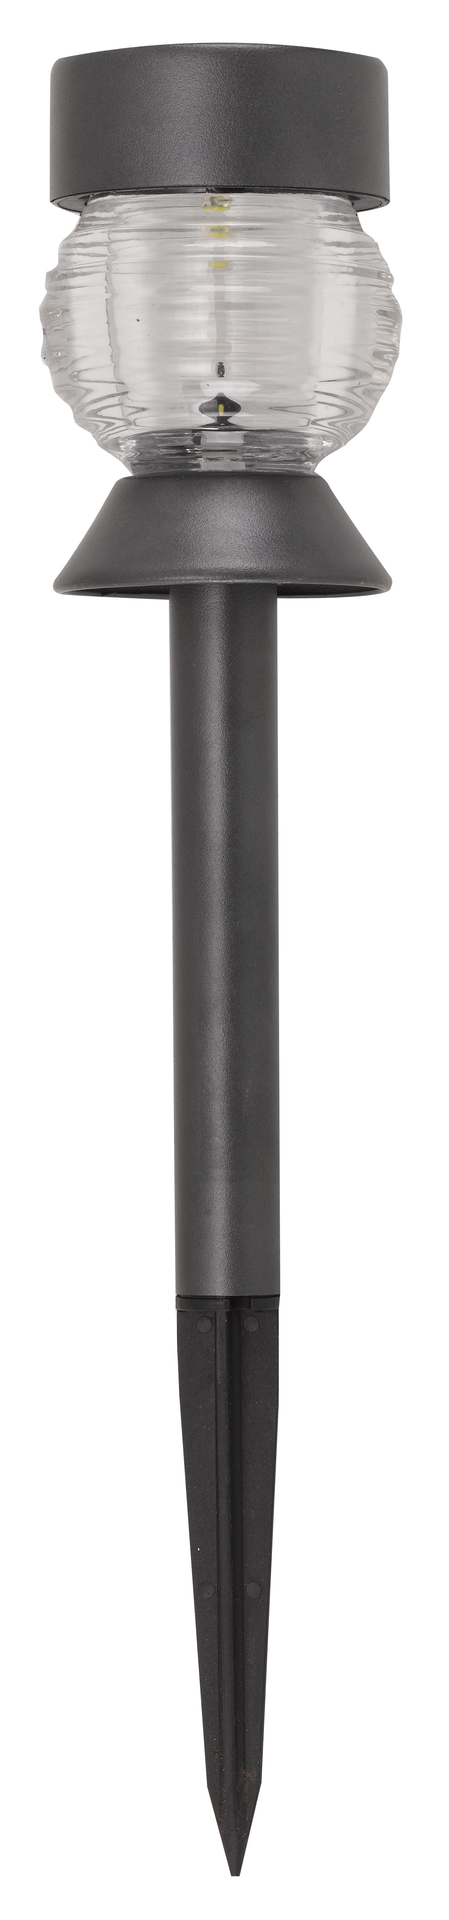 SMART GARDEN Products Ltd. Crystal 365 Stake Light